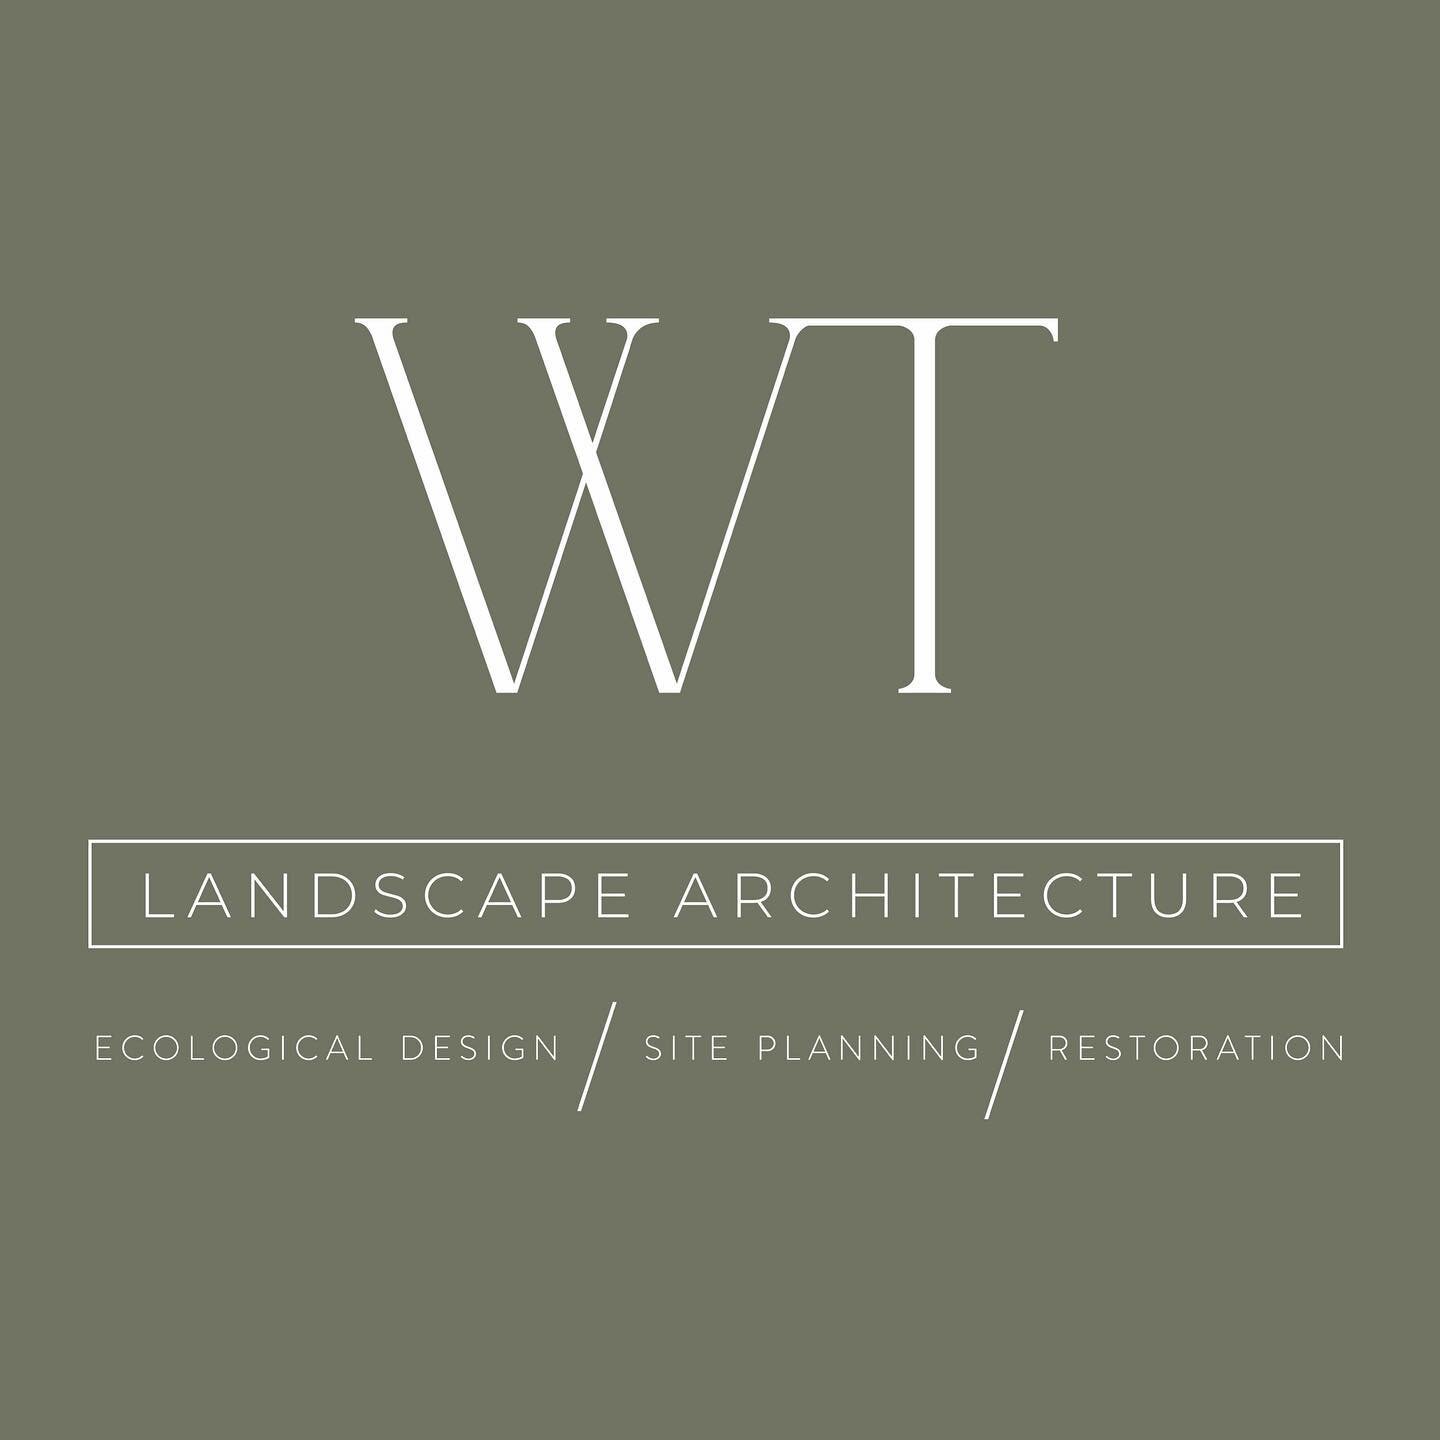 Our July 1st opening is right around the corner 🌱

Let&rsquo;s work together to make your dream landscape a reality

Wolf Tree Landscape Architecture creates surroundings that elevate nature&rsquo;s beauty and promote a sense of place. Our work hono